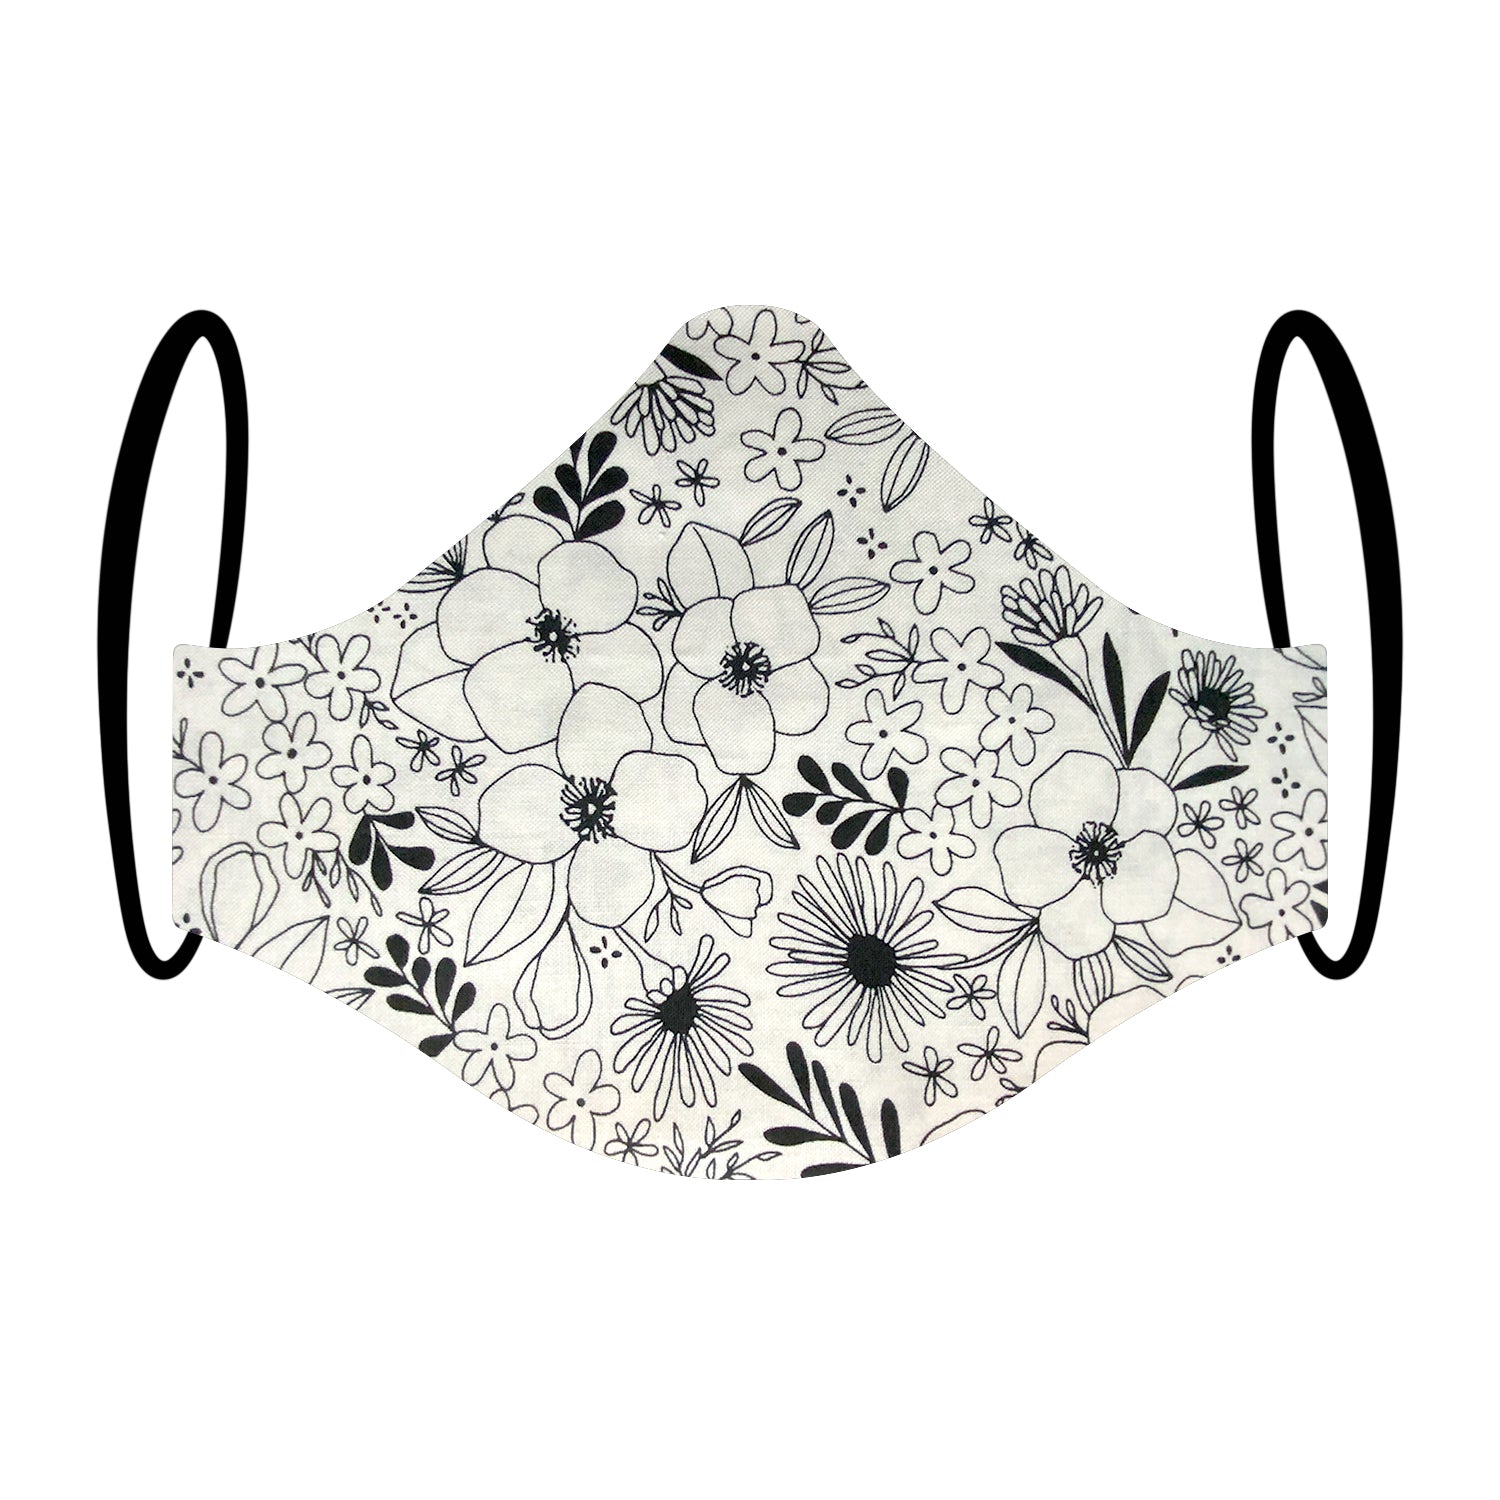 "Ebony and Ivory" Monochrome Floral Print Triple-layer Washable Face Mask